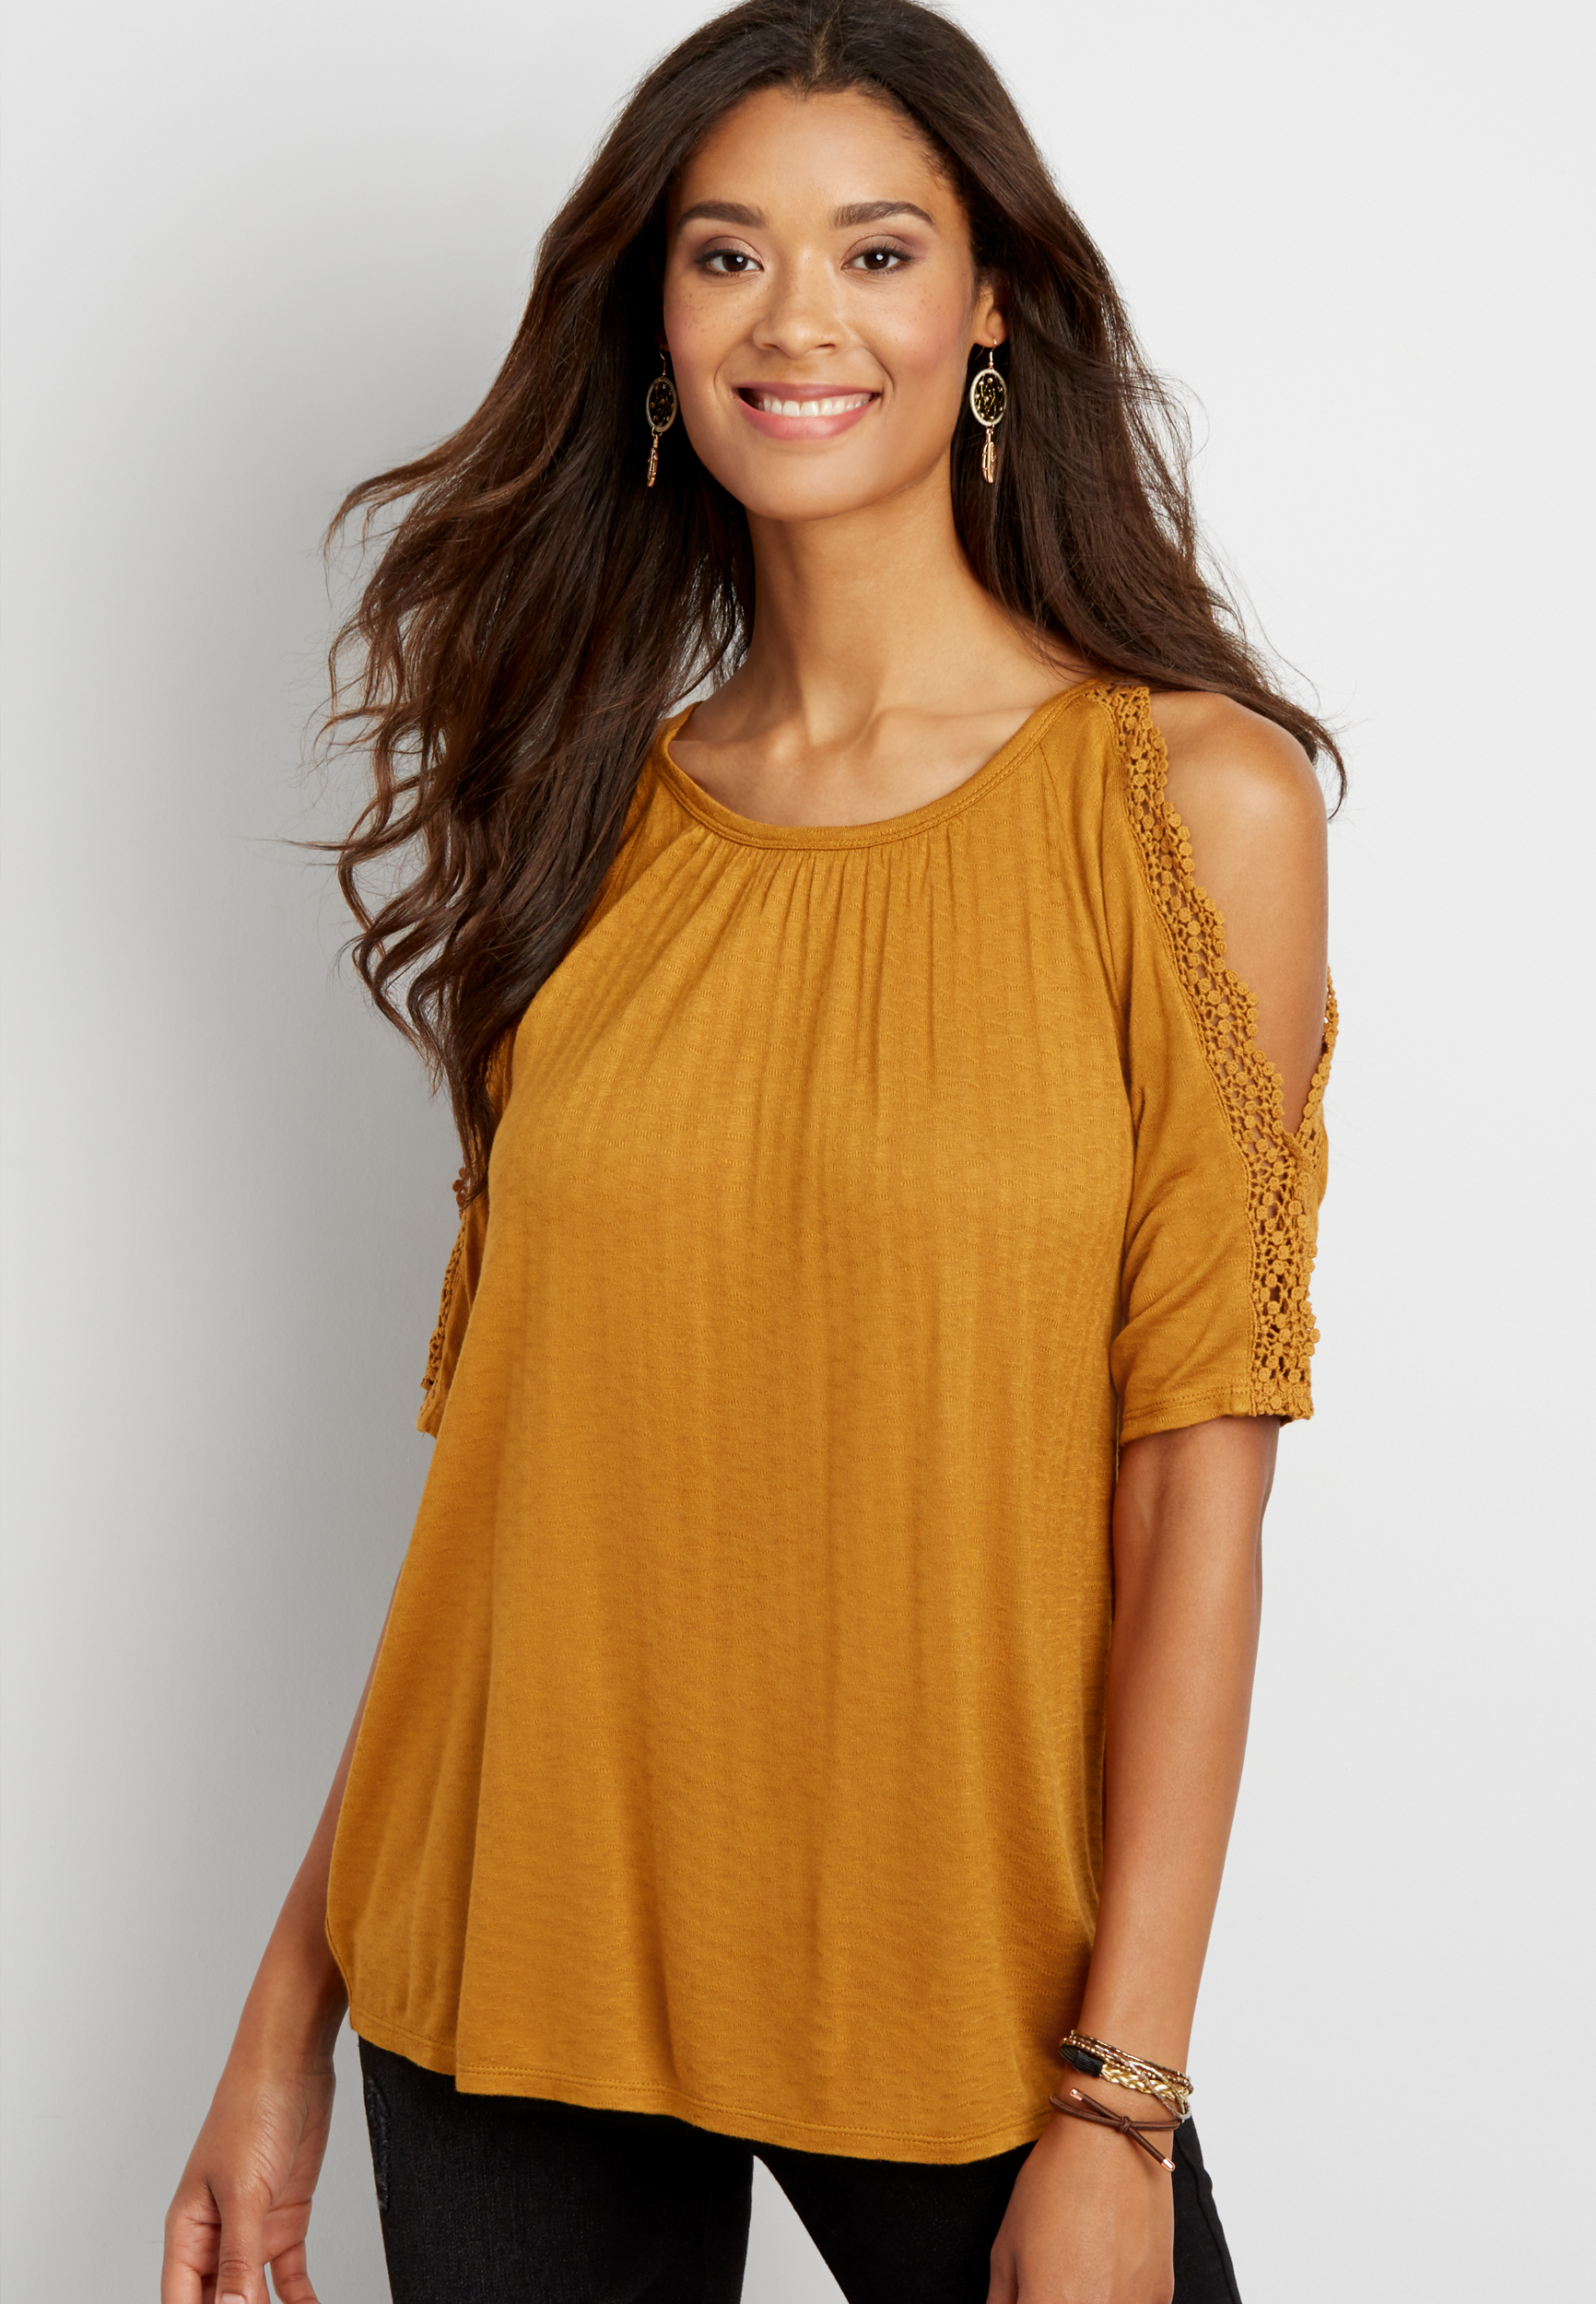 textured knit tee with crochet trimmed cold shoulders | maurices